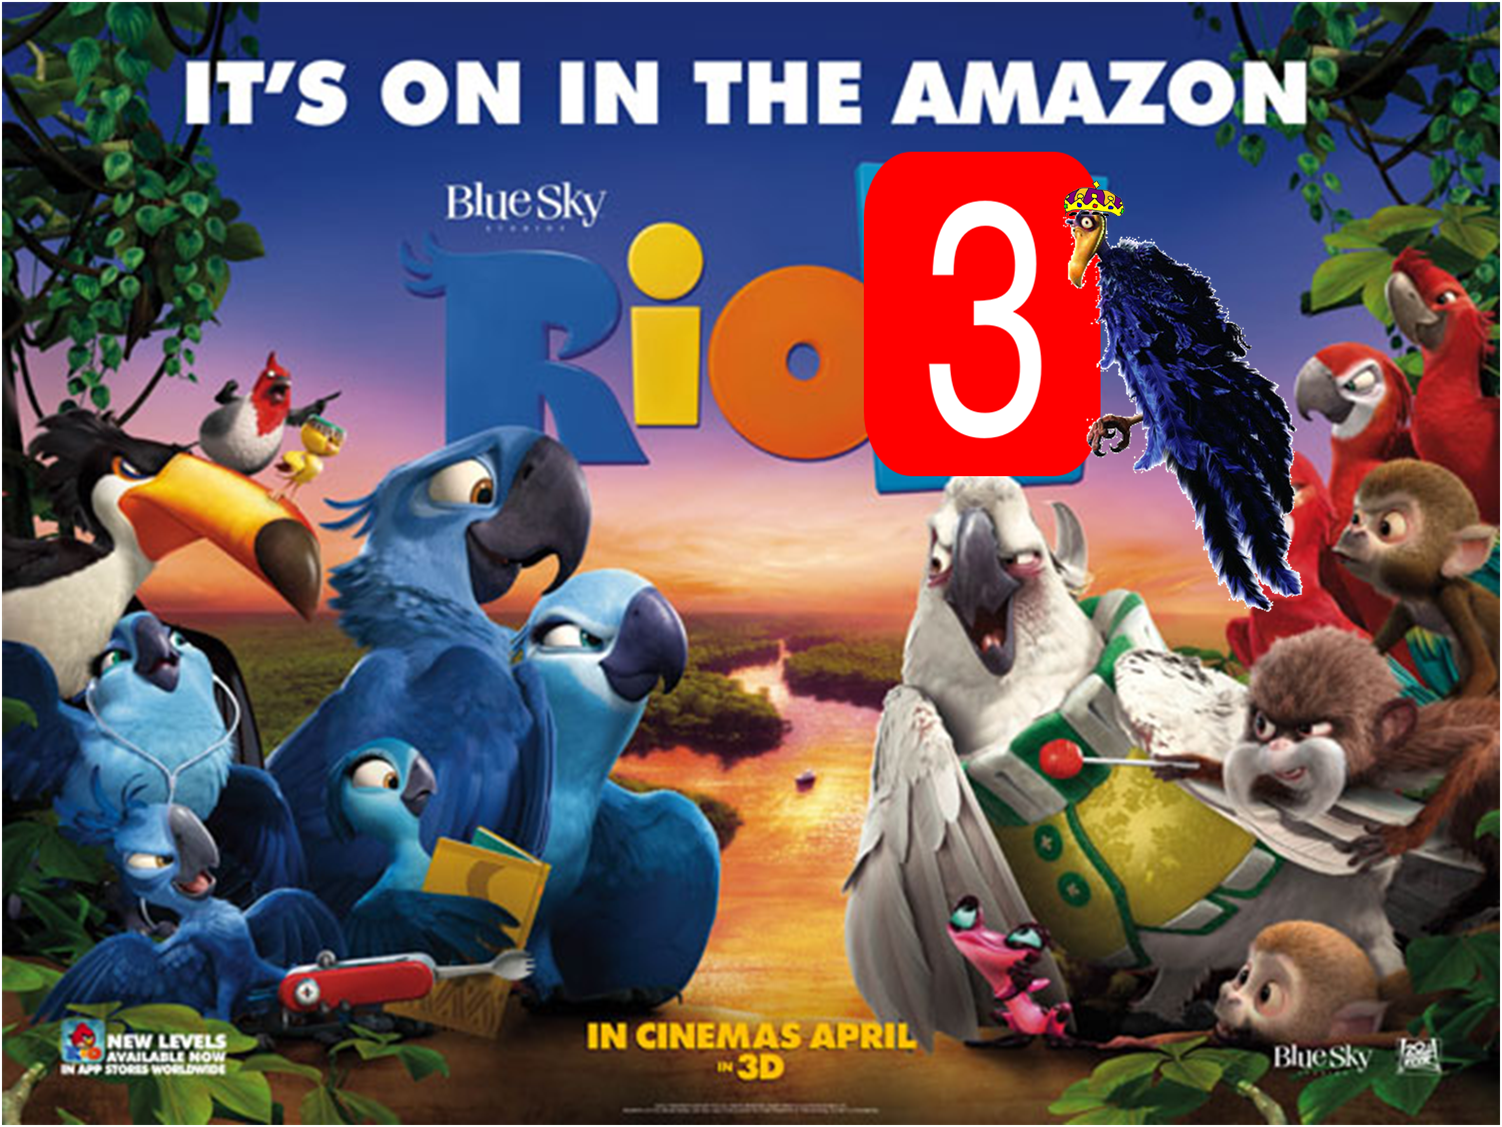 Is there a Rio 3 movie?